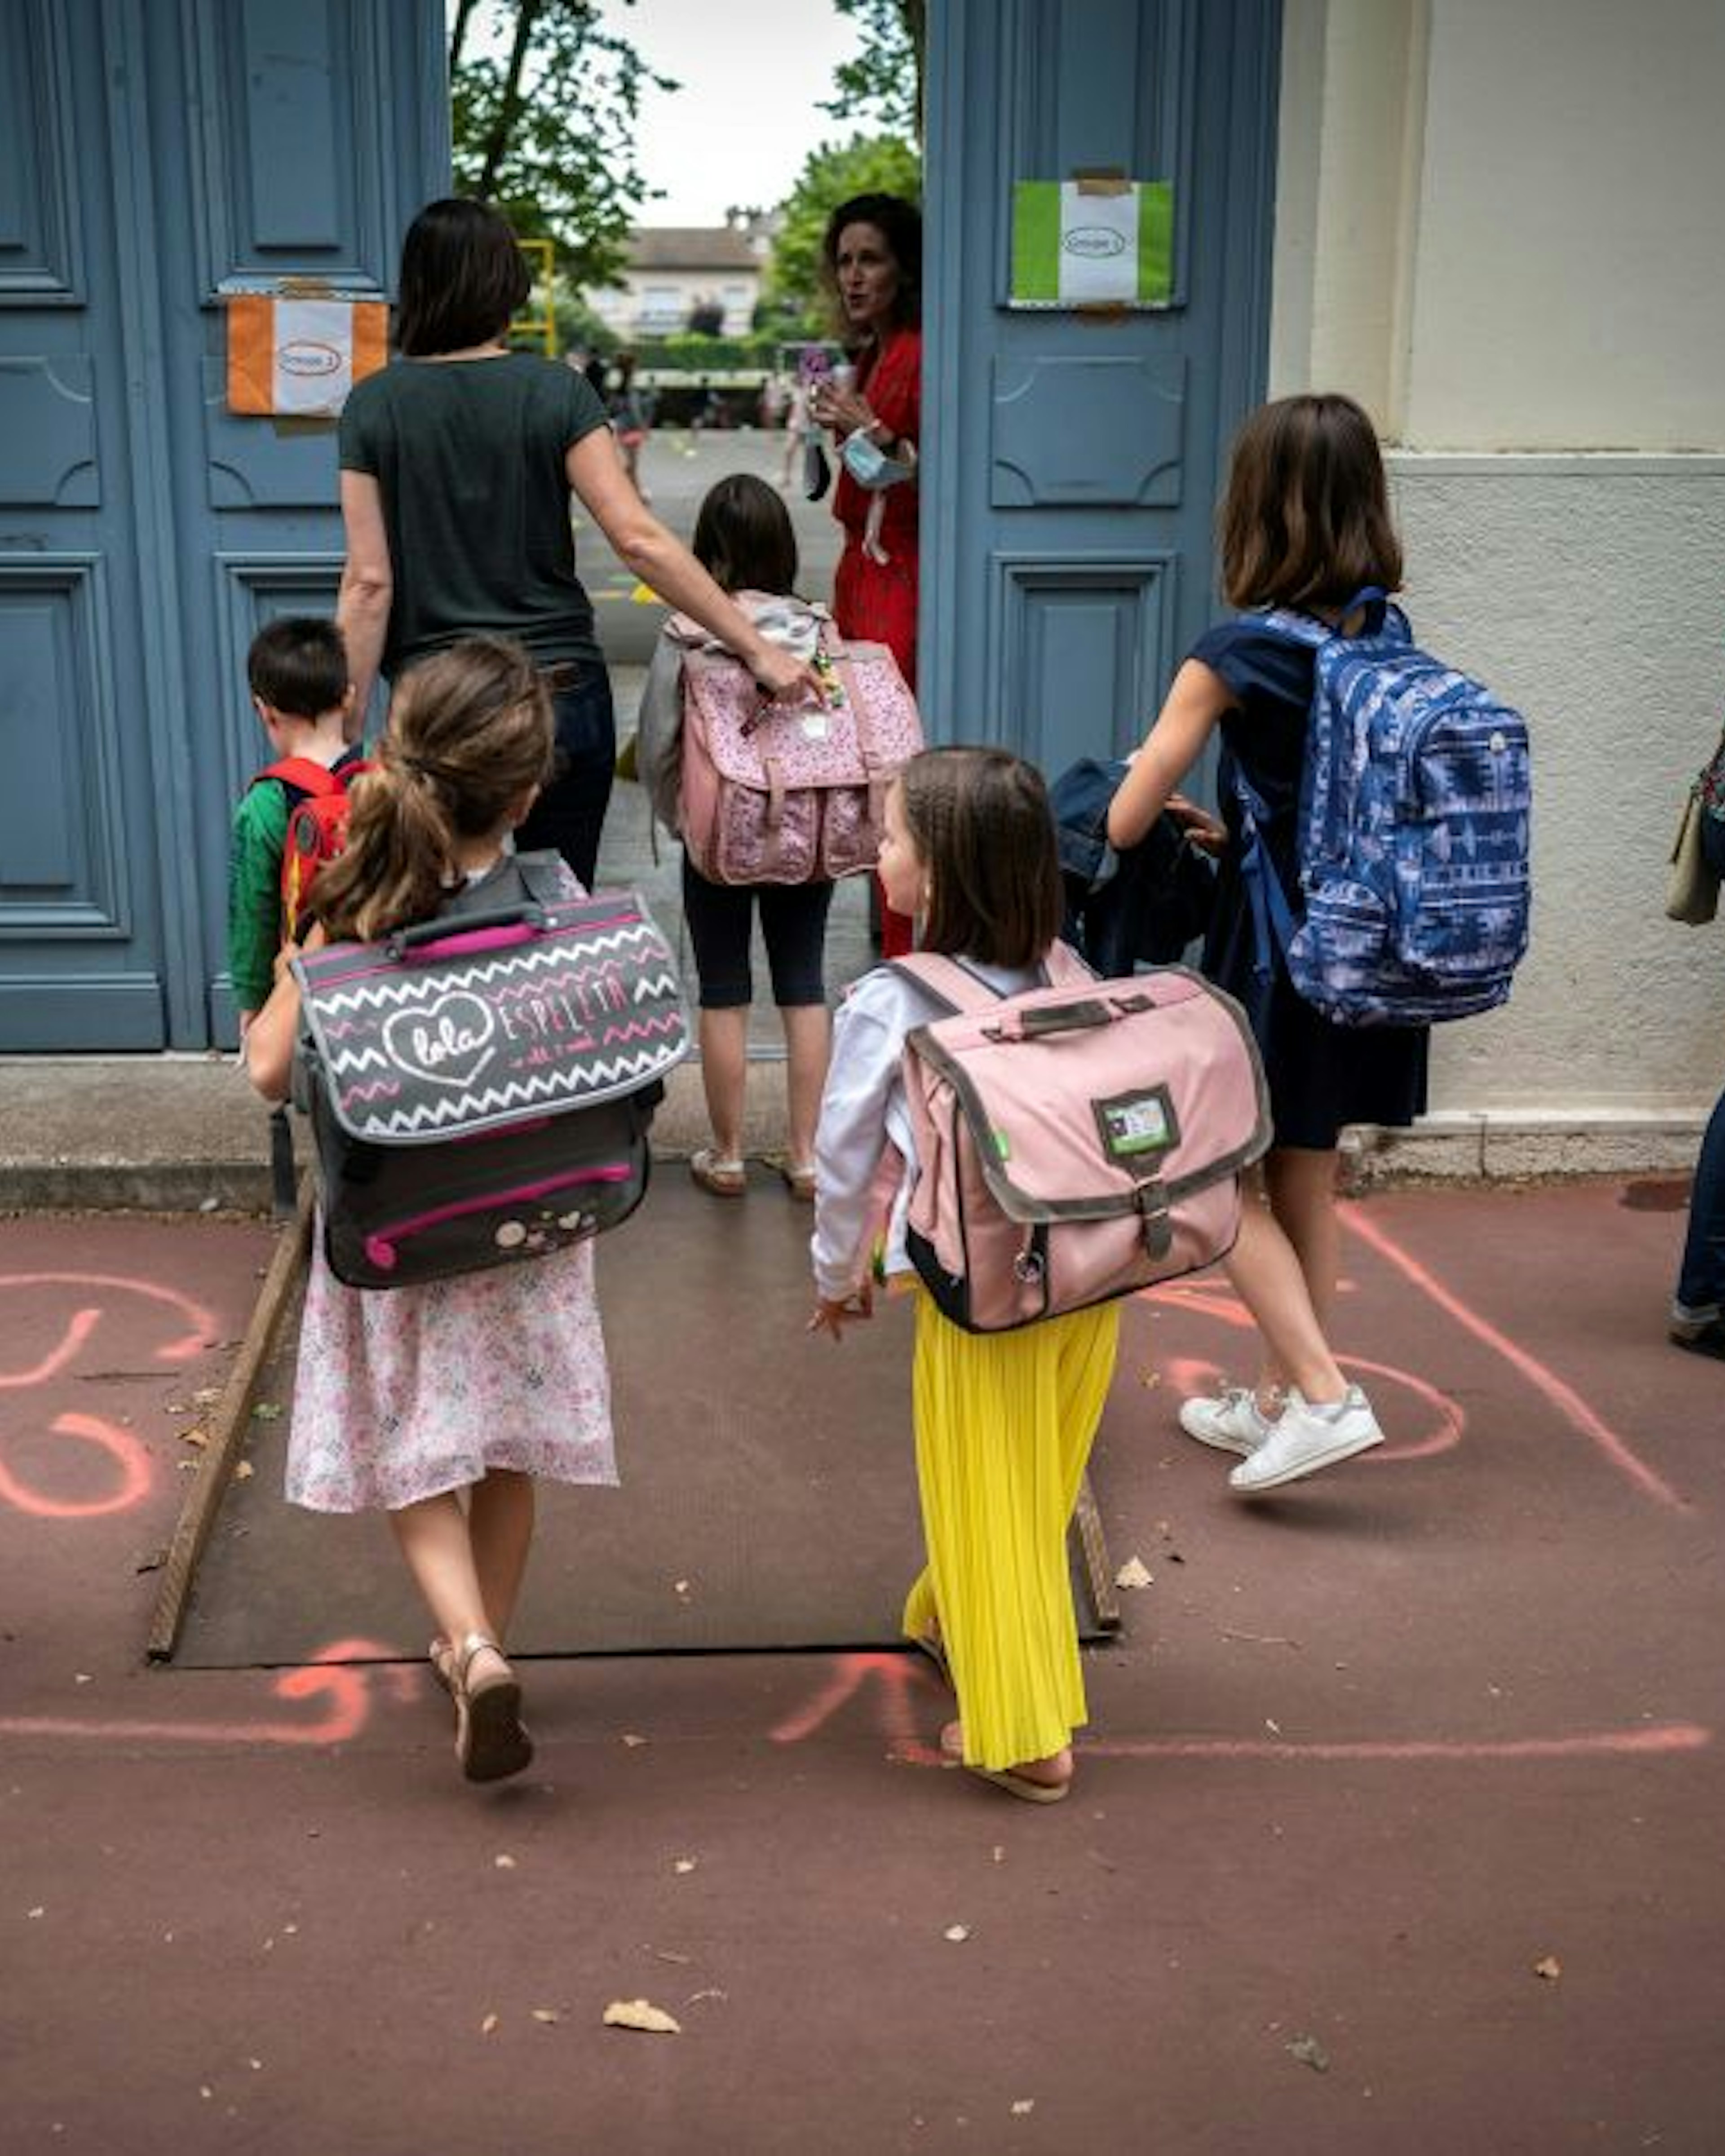 TOPSHOT - Parents and children arrive at the Jules Julien elementary school in Toulouse, southern France, on June 22, 2020 following the reopening of schools as France eases lockdown measures taken to curb the spread of the COVID-19 (the novel coronavirus). (Photo by Lionel BONAVENTURE / AFP) (Photo by LIONEL BONAVENTURE/AFP via Getty Images)